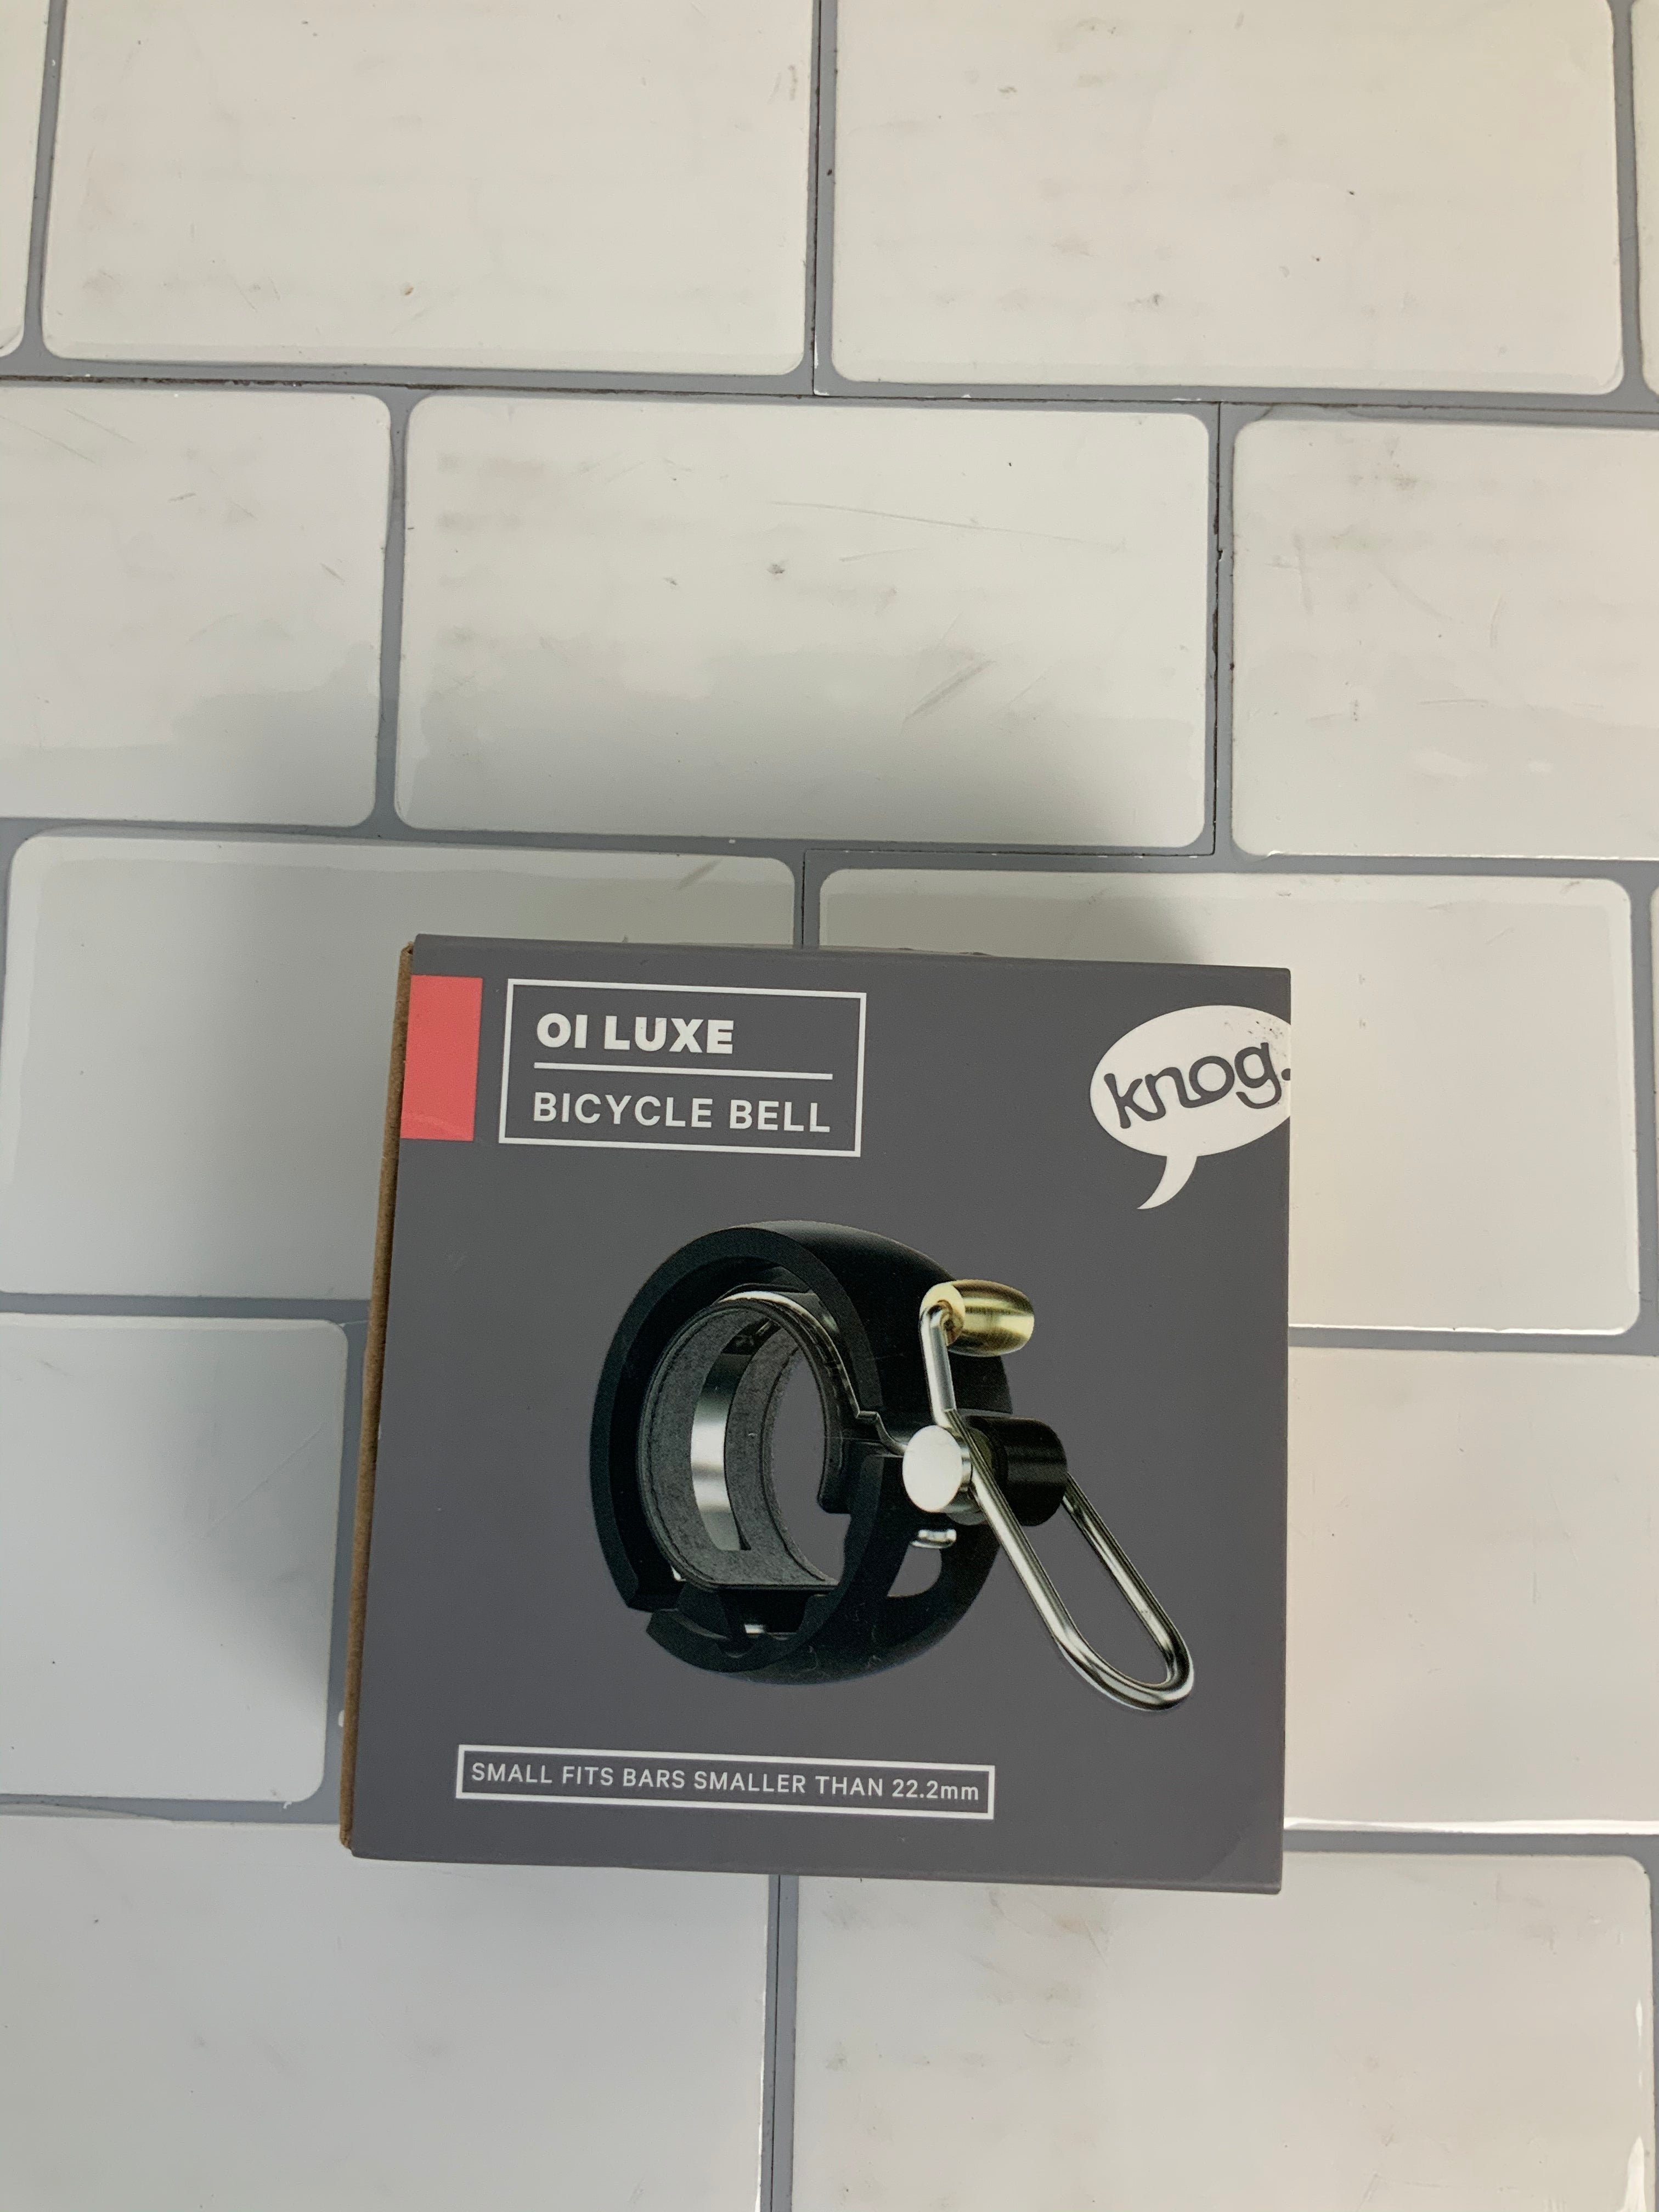 Knog Oi Luxe Bike Bell-small (7452805333230)